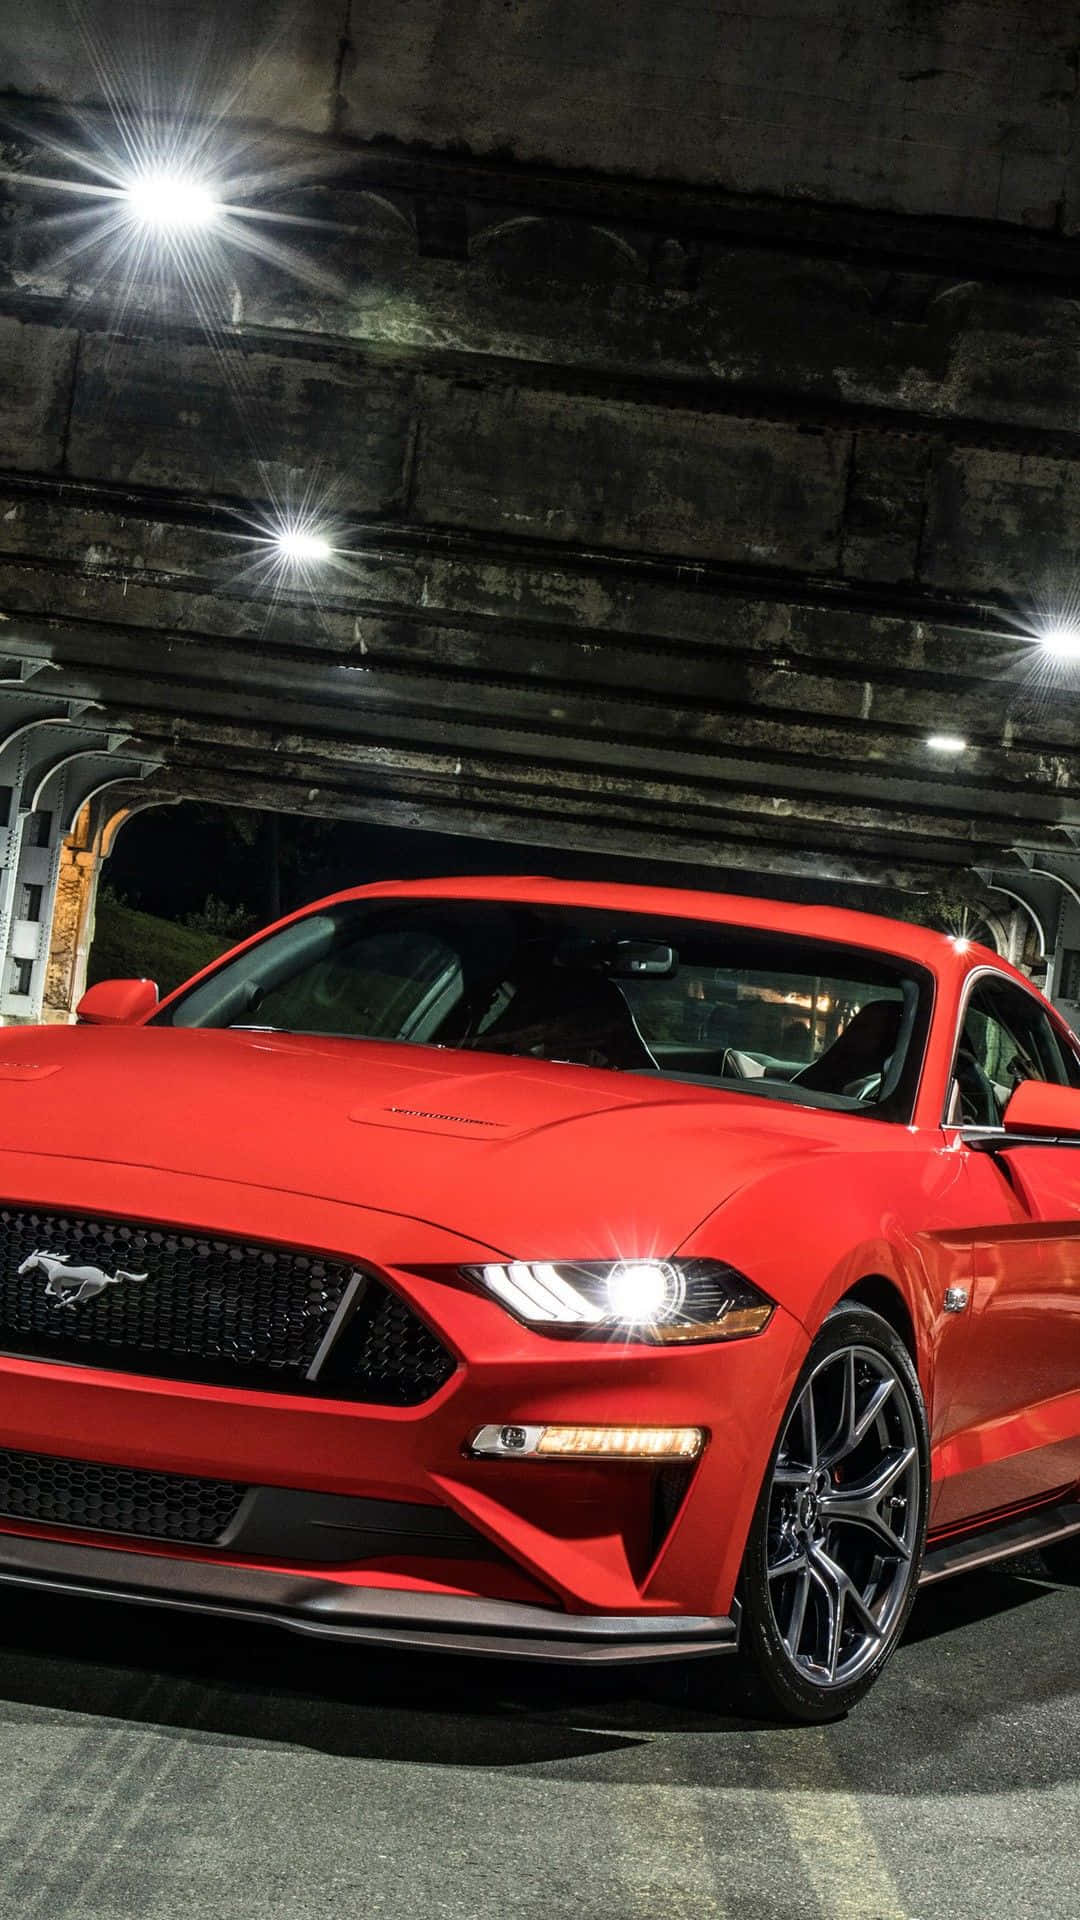 The Red 2019 Ford Mustang Gt Is Parked In A Tunnel Wallpaper